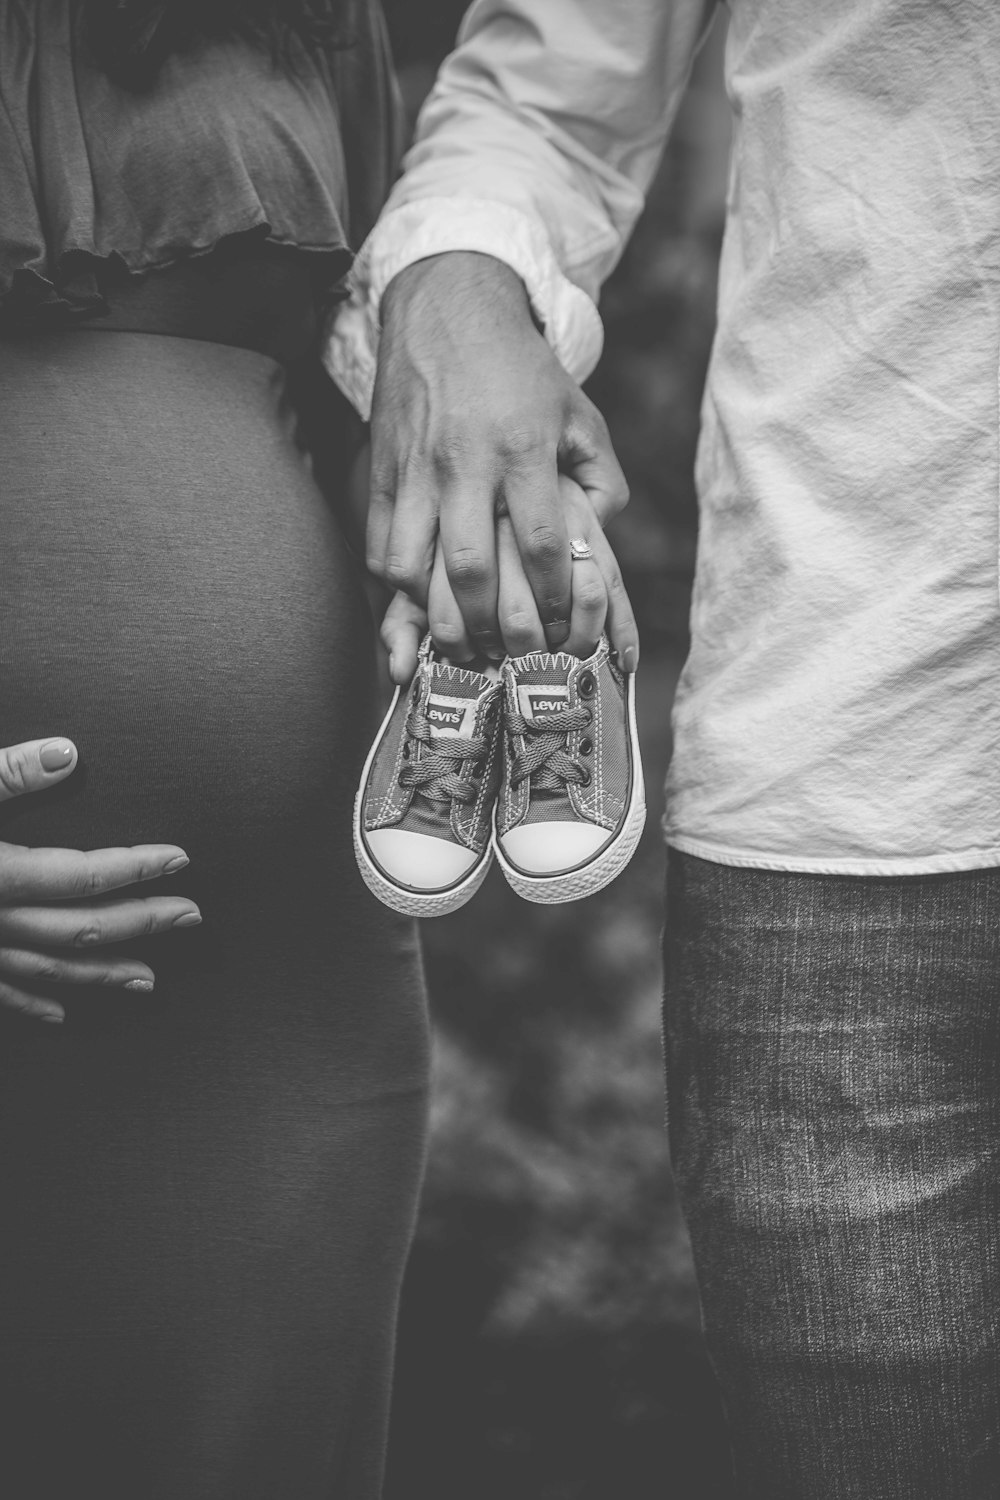 grayscale photo of man and woman holding baby's low-top shoes